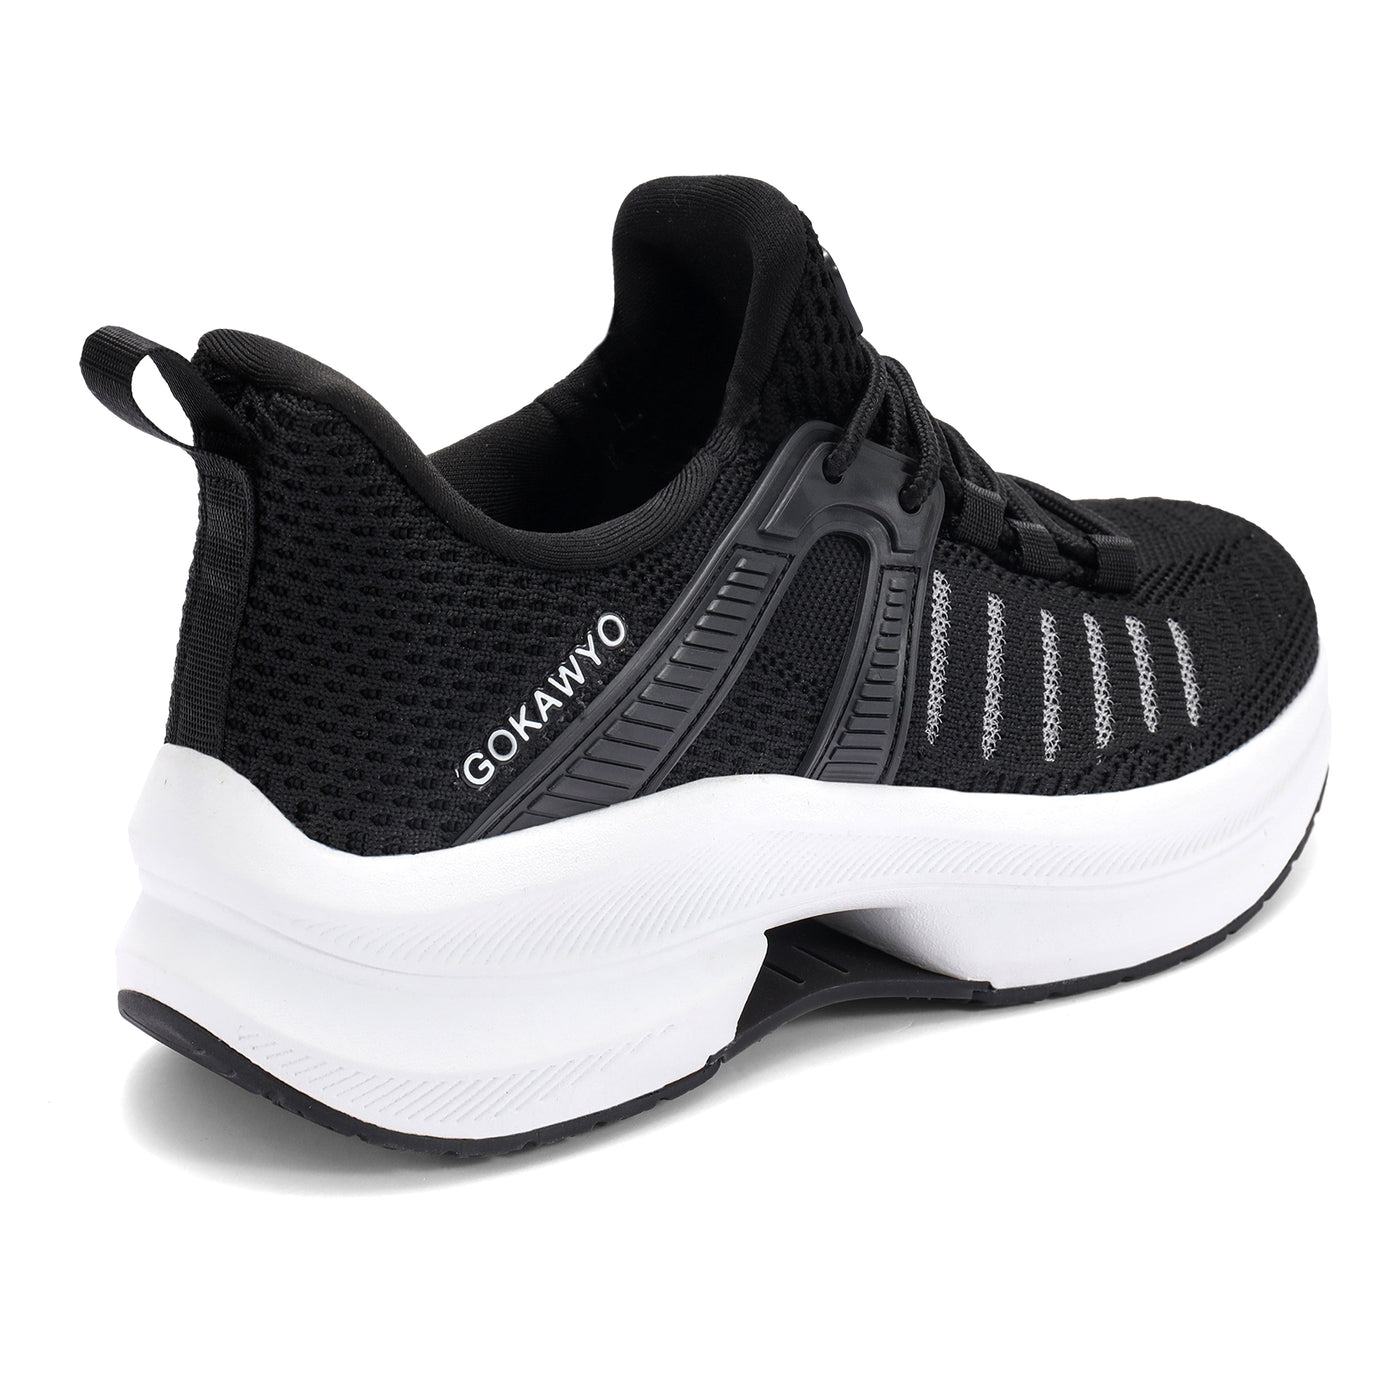 Just So So  women's fashion casual sneakers